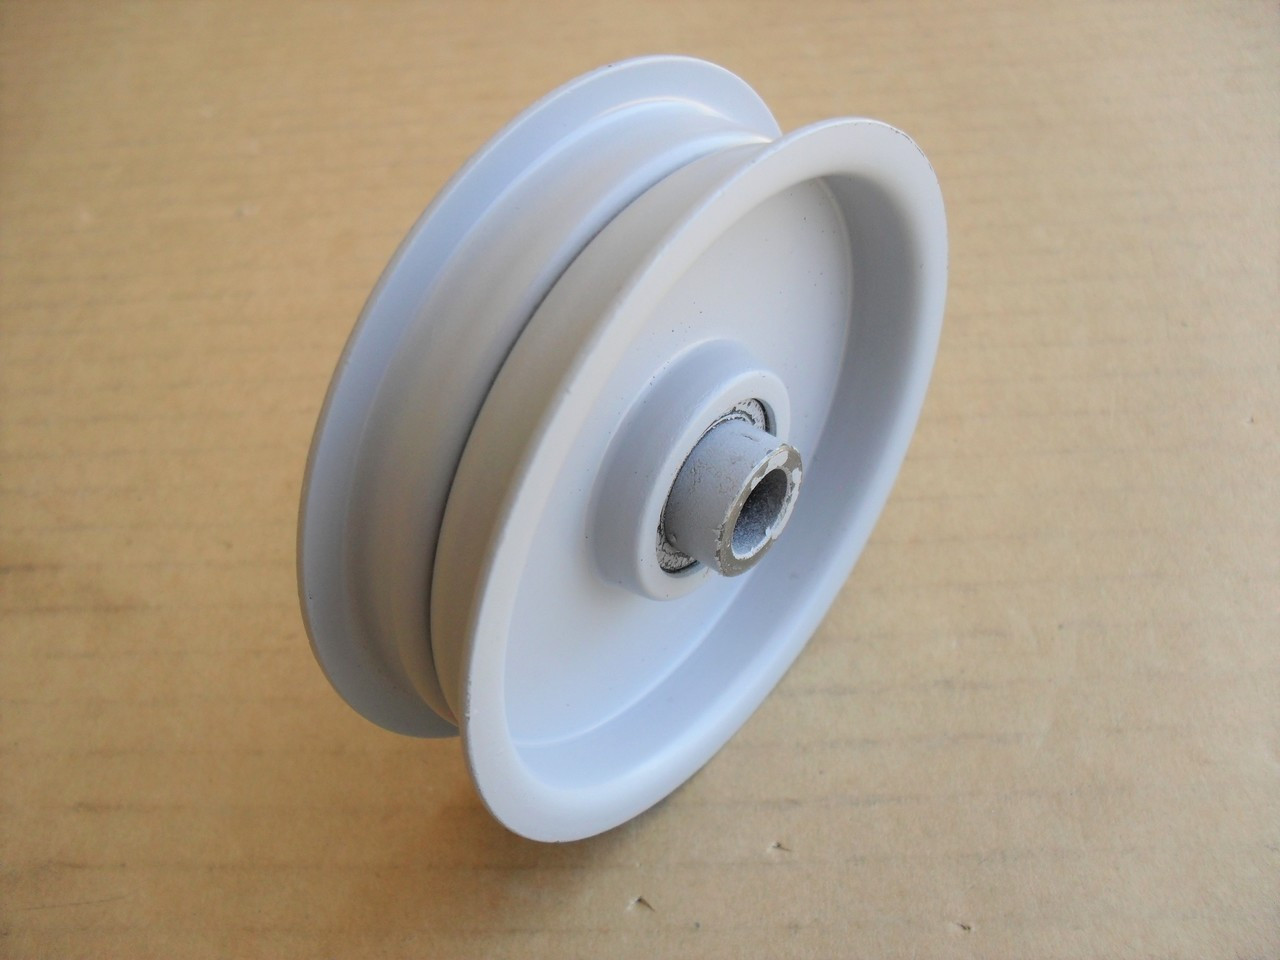 Idler Pulley for Gilson 229768 Made In USA Height: 7/8" ID: 3/8" OD: 3-1/8"